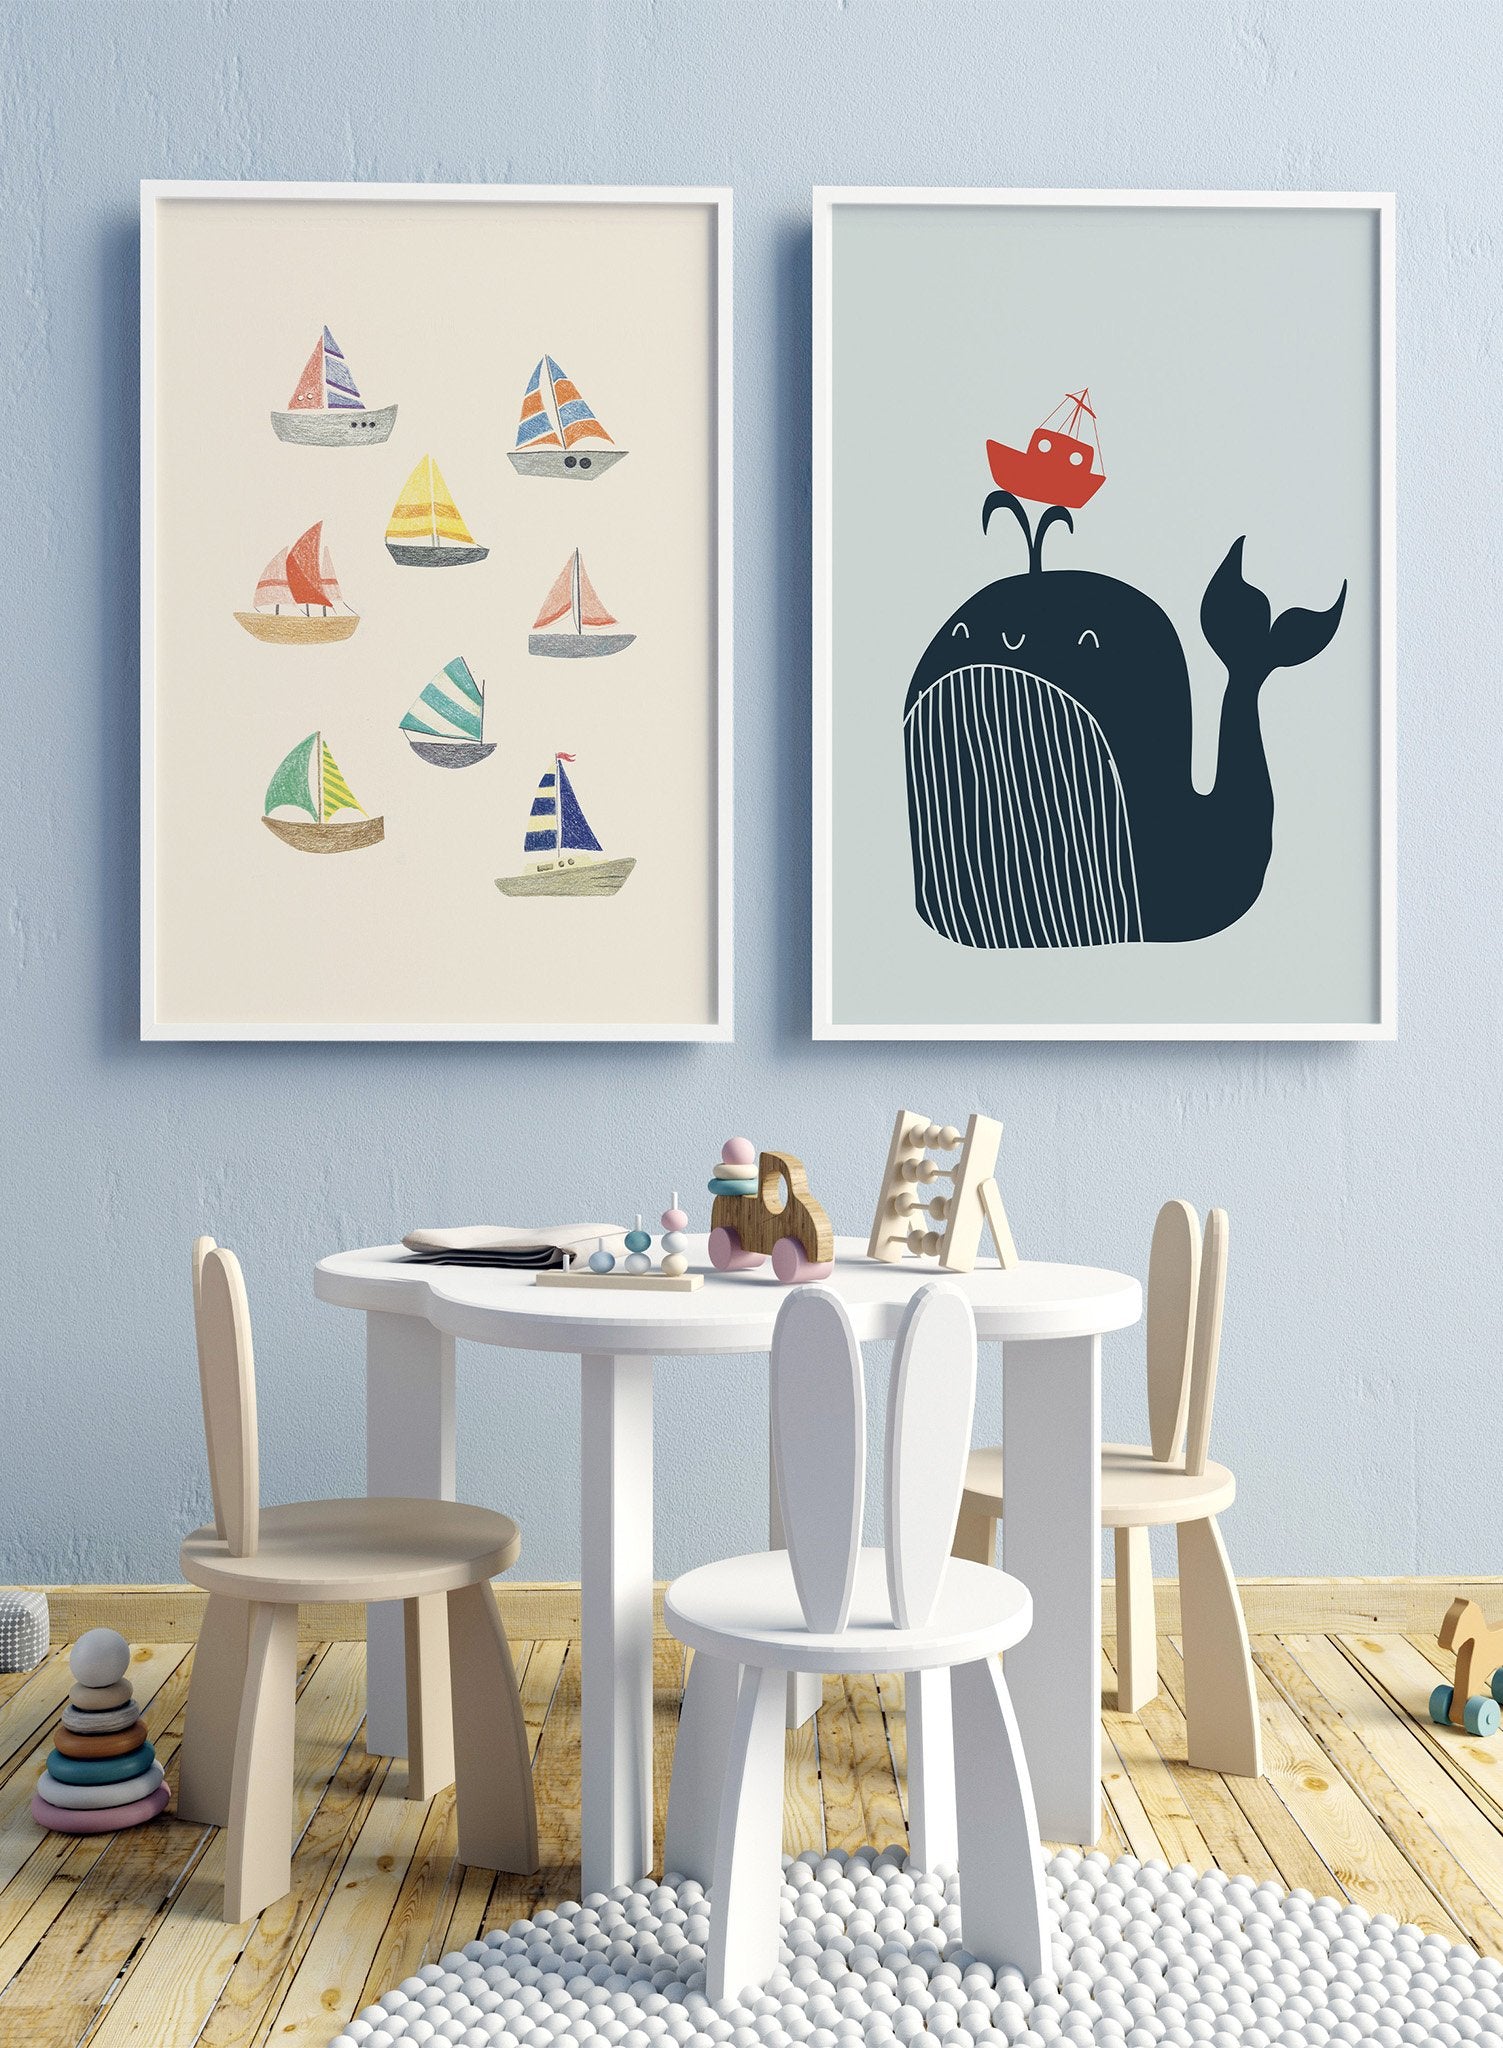 Whale Ride is a minimalist illustration of a dark blue whale with a stripped belly holding up a red boat through its blowhole by Opposite Wall.